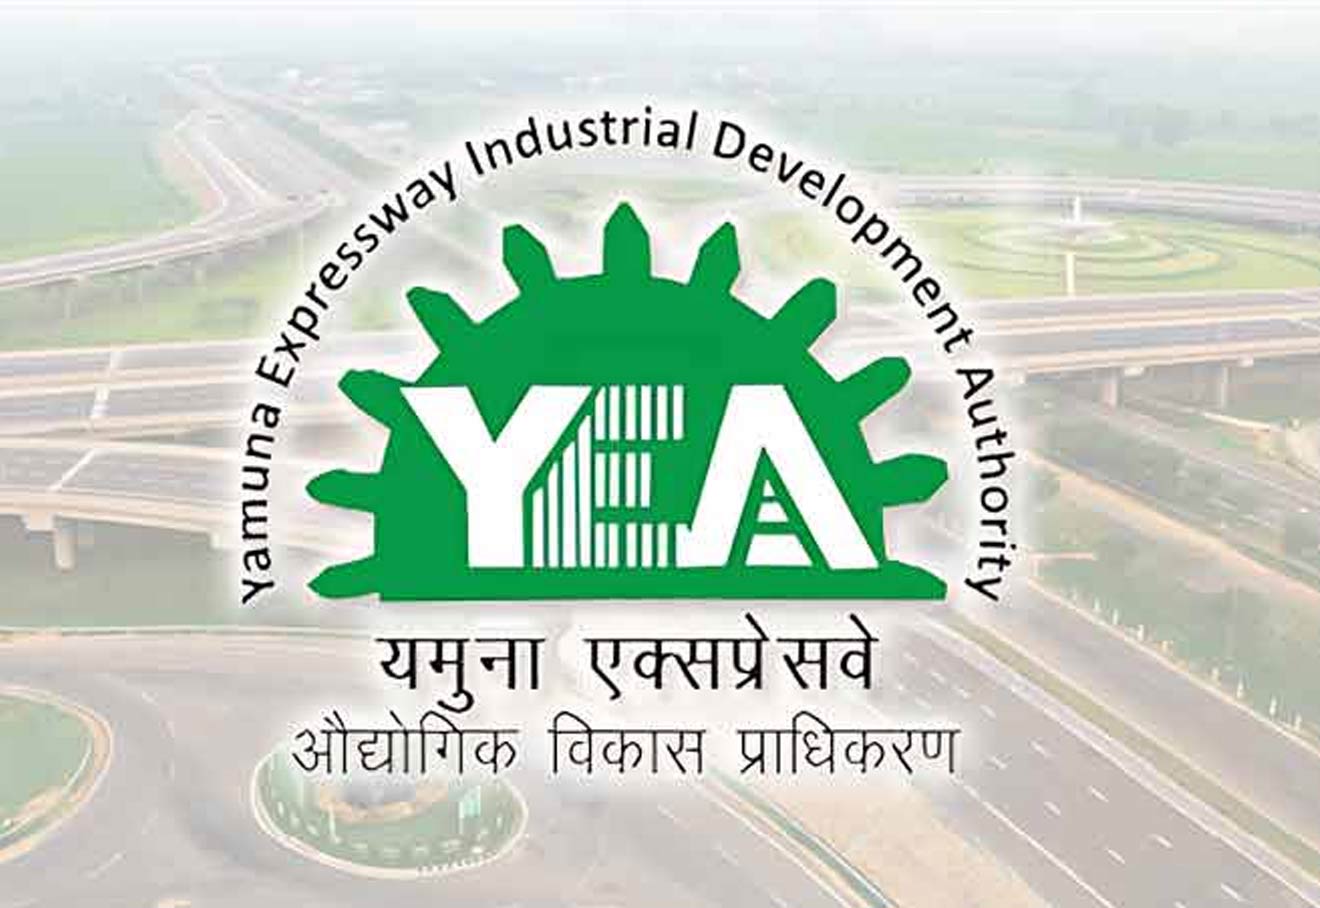 YEIDA Invites Applications For Plots To Set Up Furniture Parks In Greater Noida